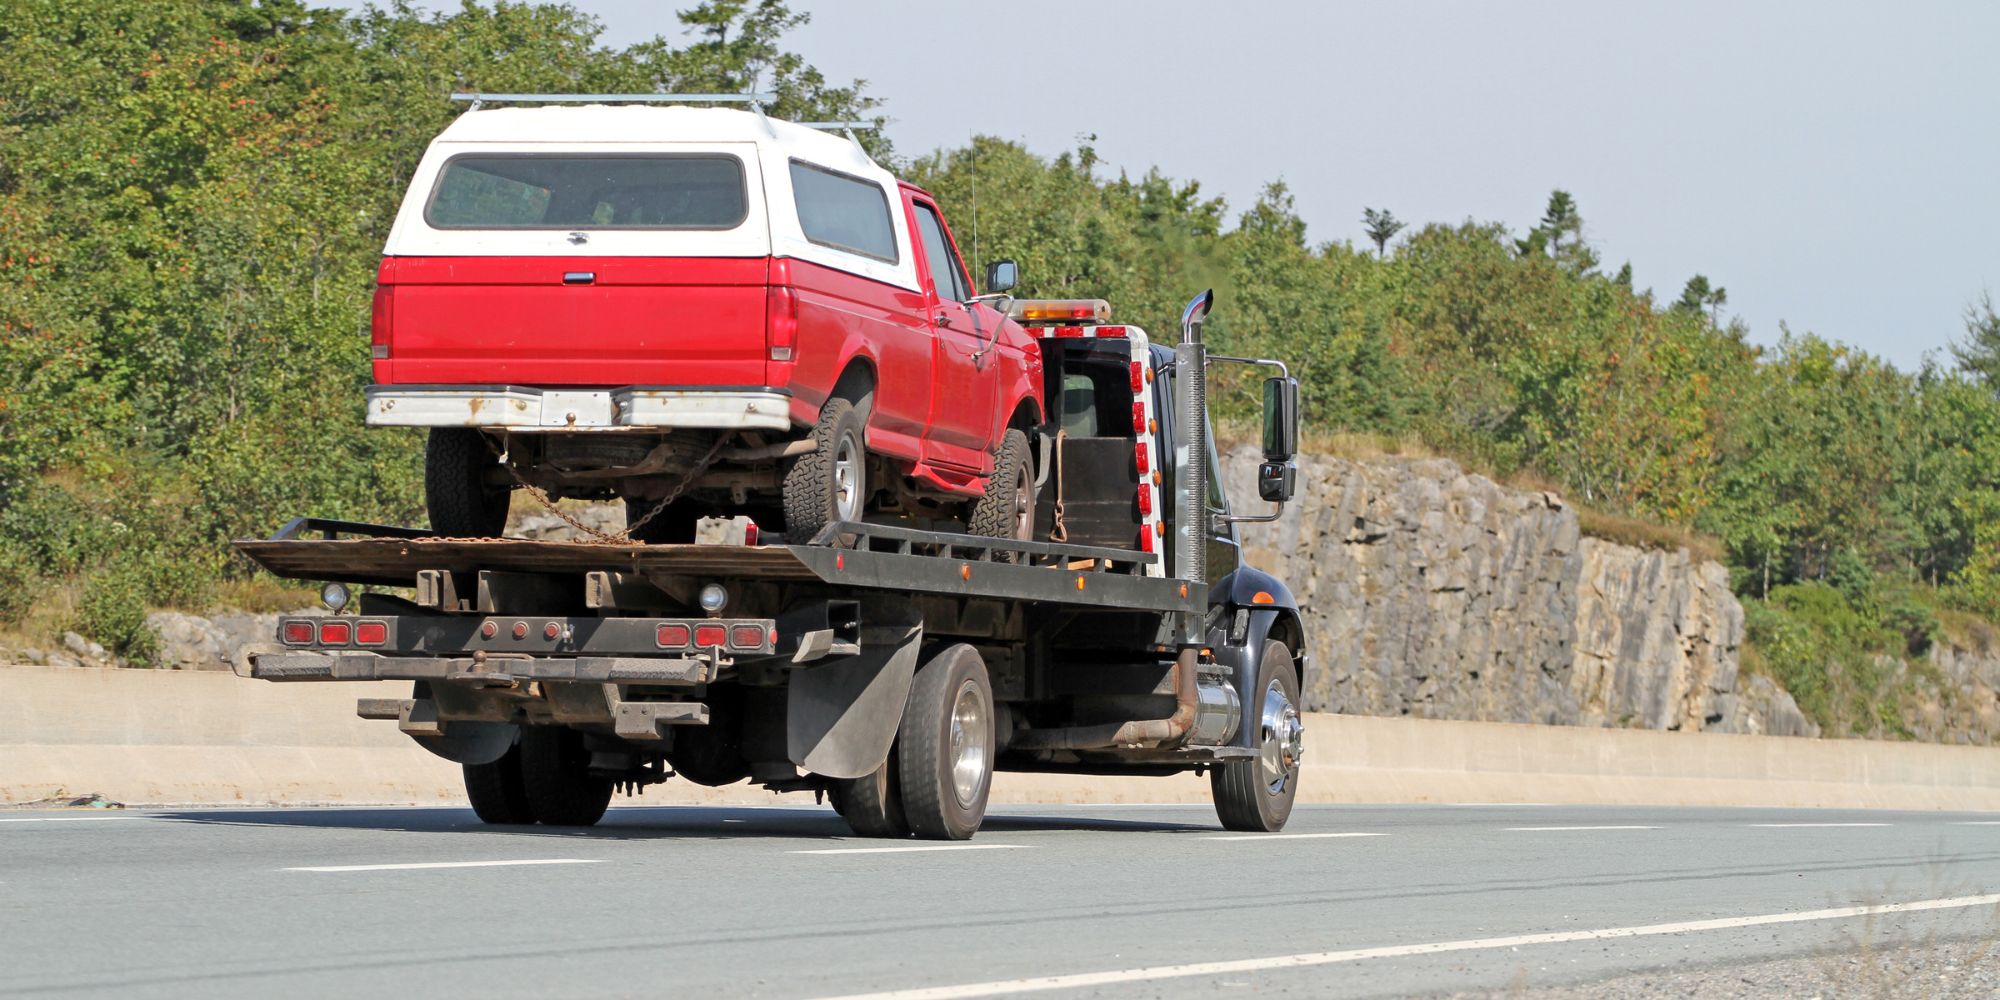 Tow Service How to Choose the Right Provider for Your Specific Needs